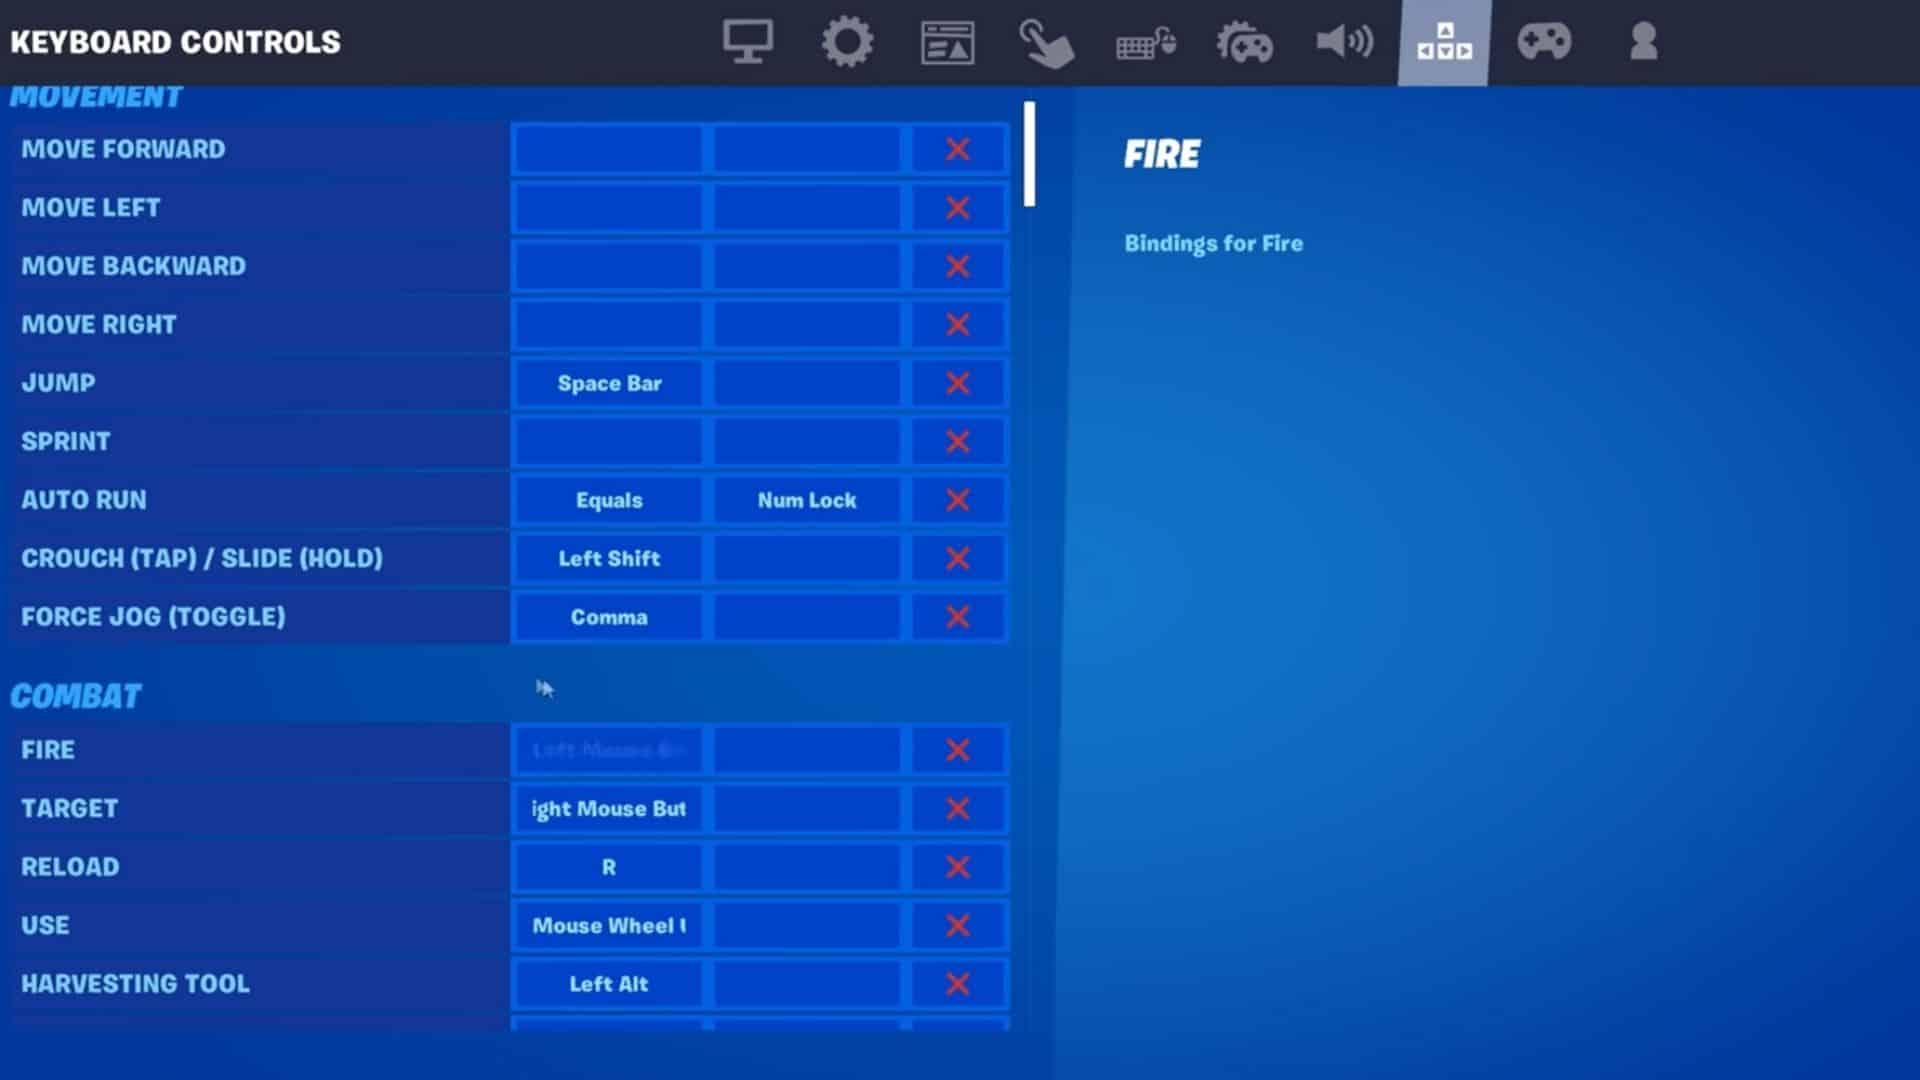 You can now play against Fortnite players on PS4 and Xbox at the same time